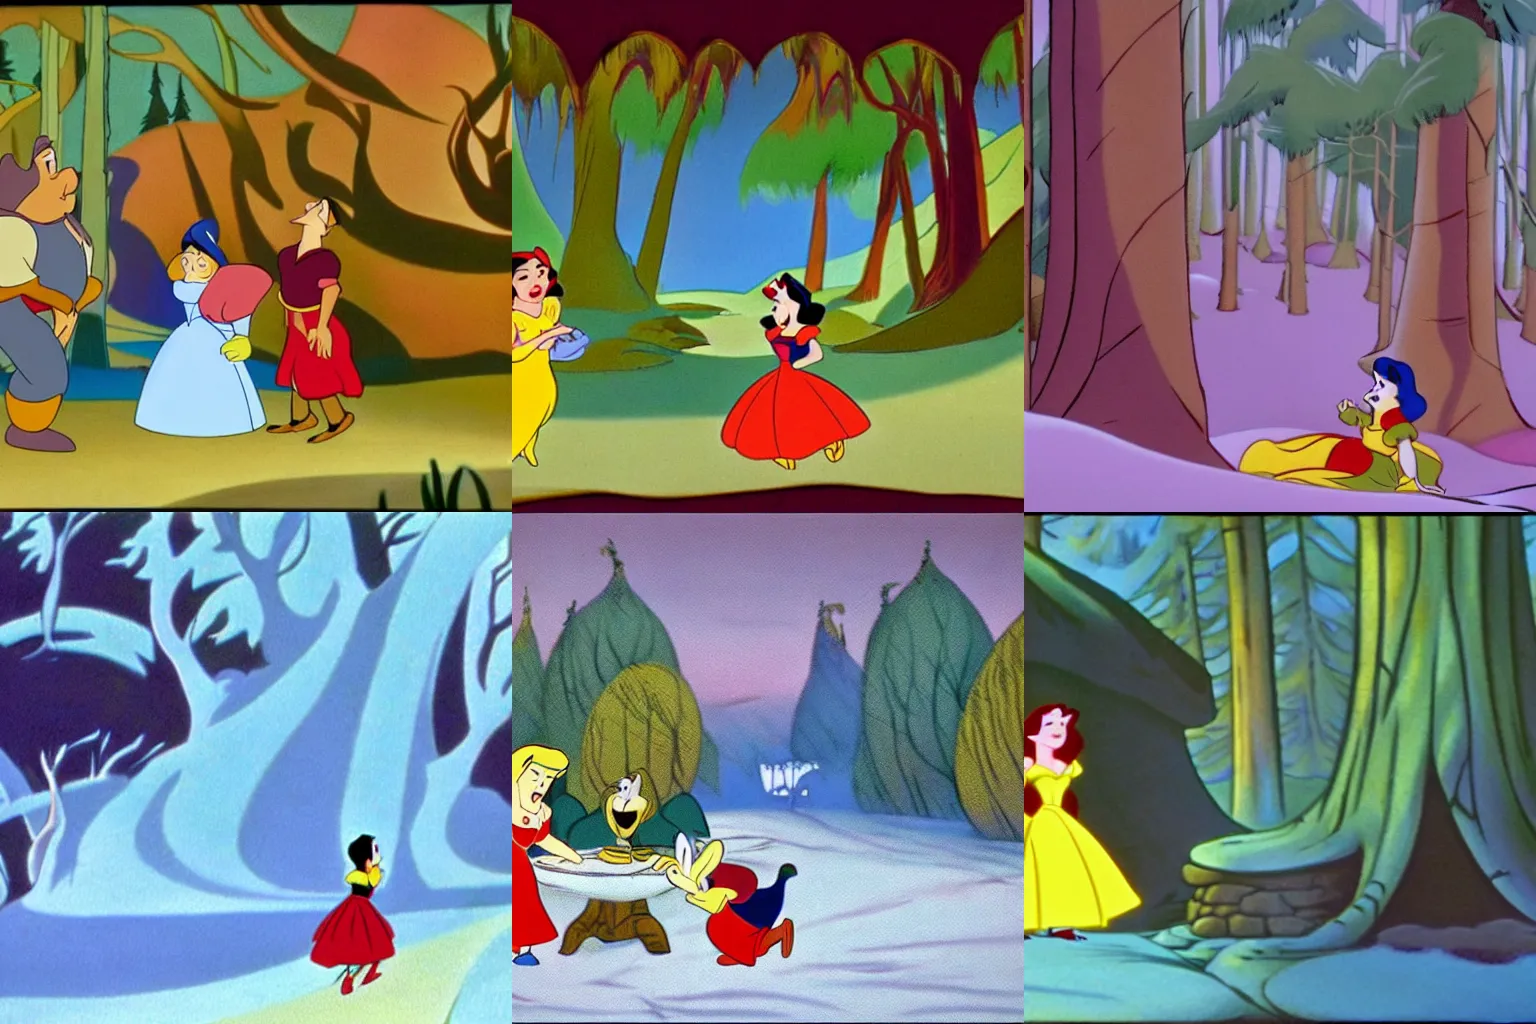 Prompt: Screenshot from the coloured Disney animated motion picture released in 1937 Snow White and the Seven Dwarfs, directed by Marc Davis and Clyde Geronimi, beautiful enchanted forest full of